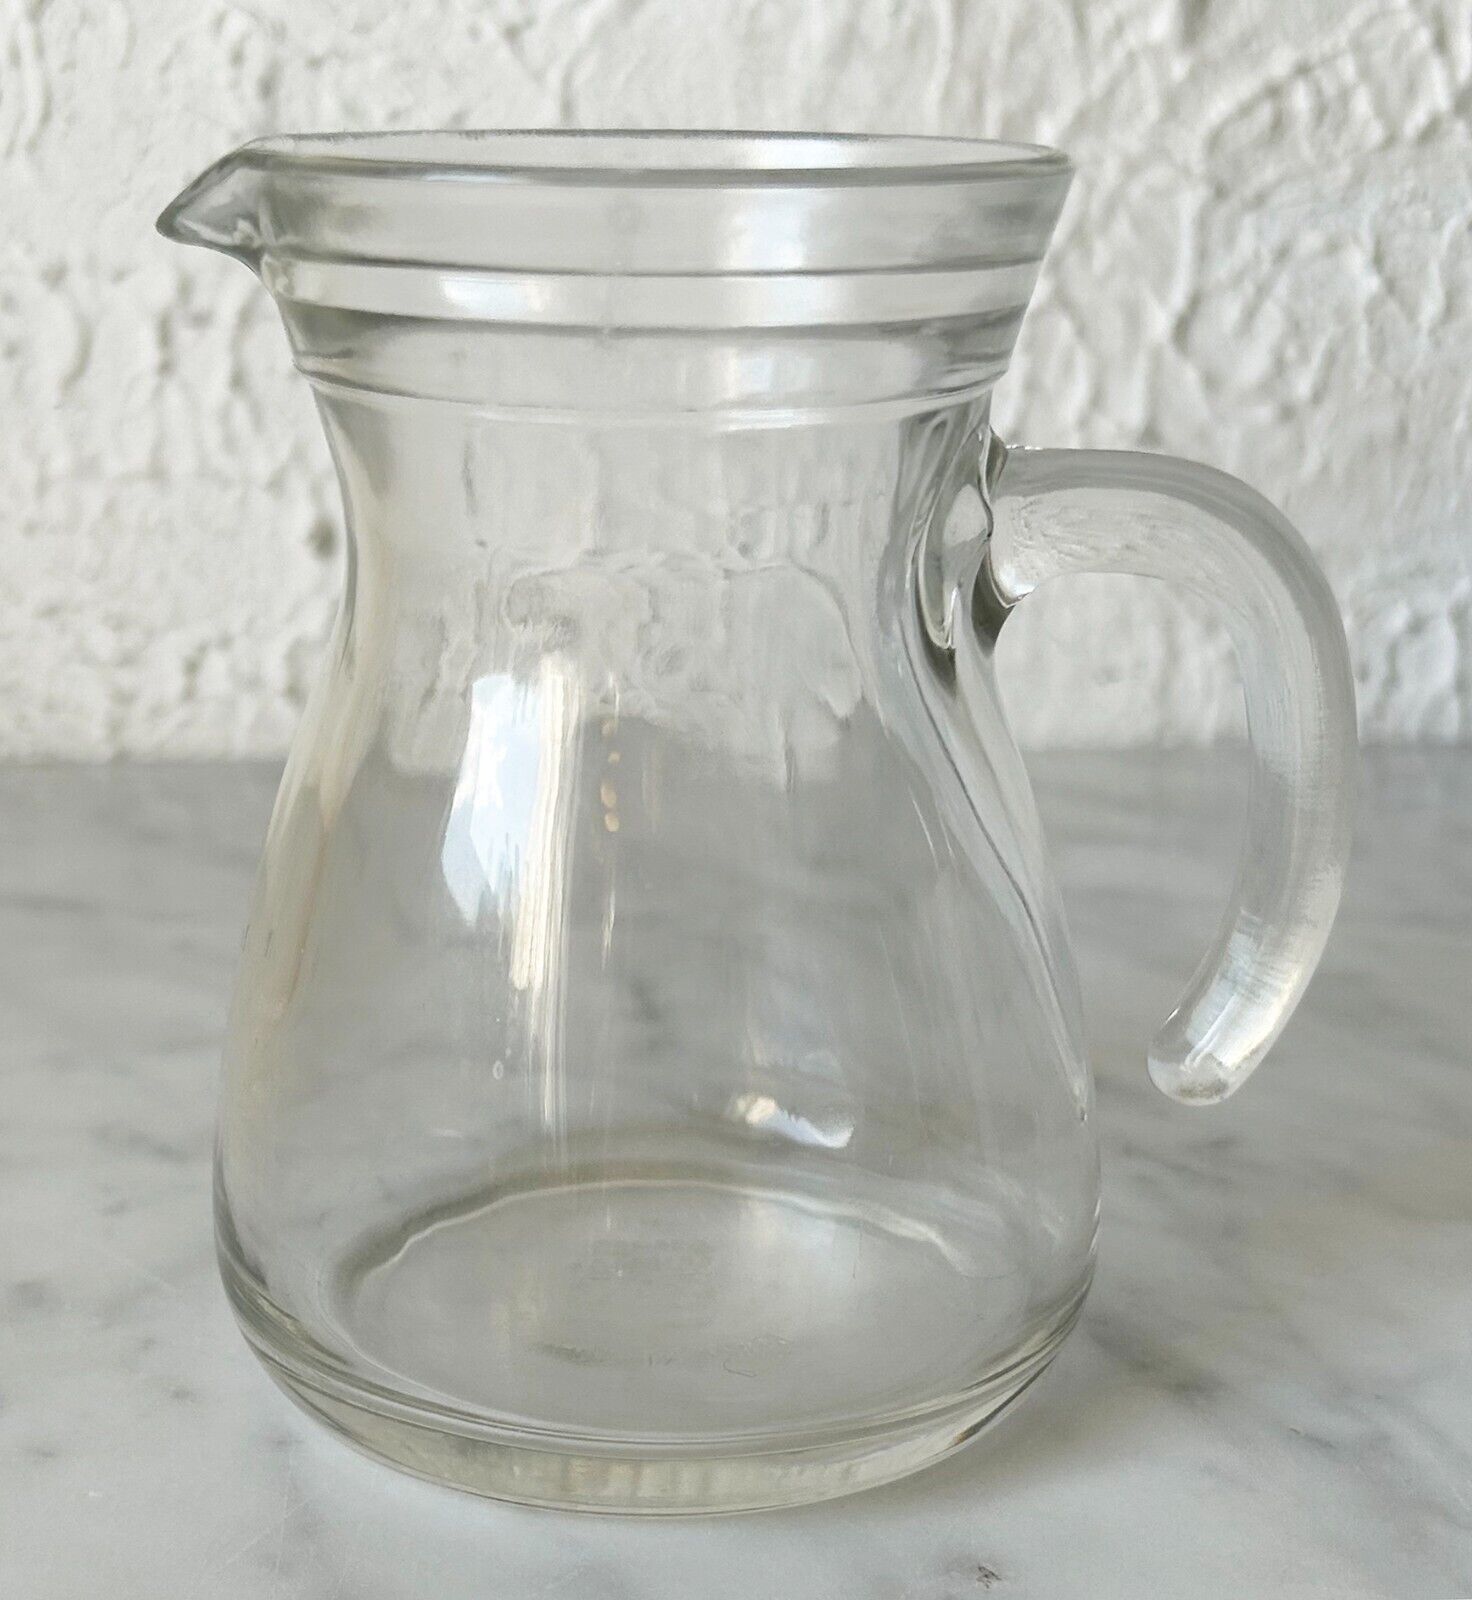 Vintage Cerve Small Clear Glass Pitcher Creamer Made in Italy 10 oz/283.5 mL